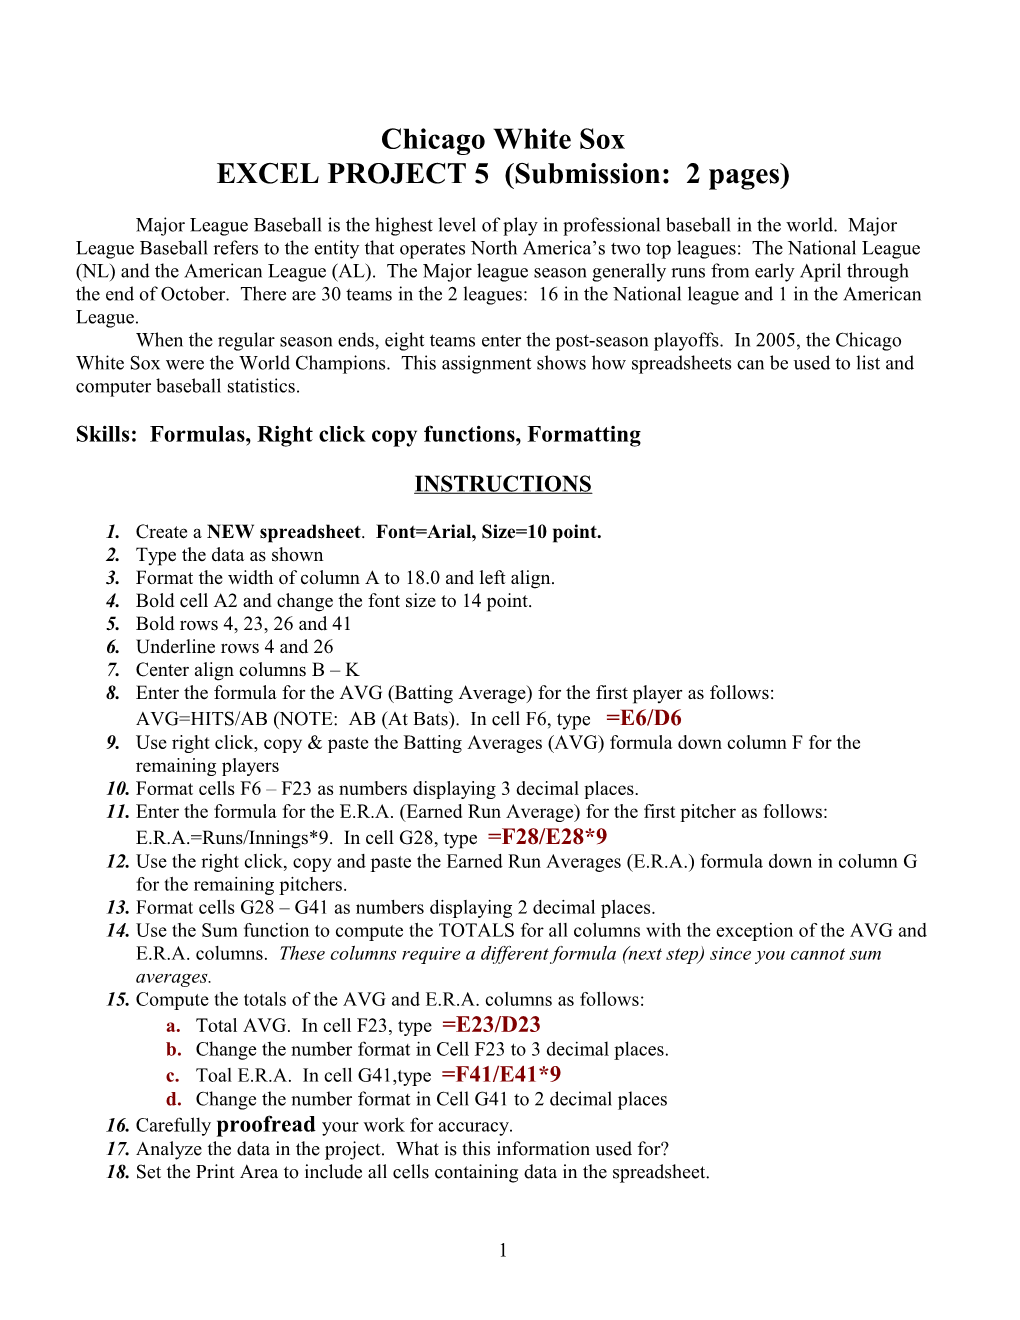 EXCEL PROJECT 5 (Submission: 2 Pages)